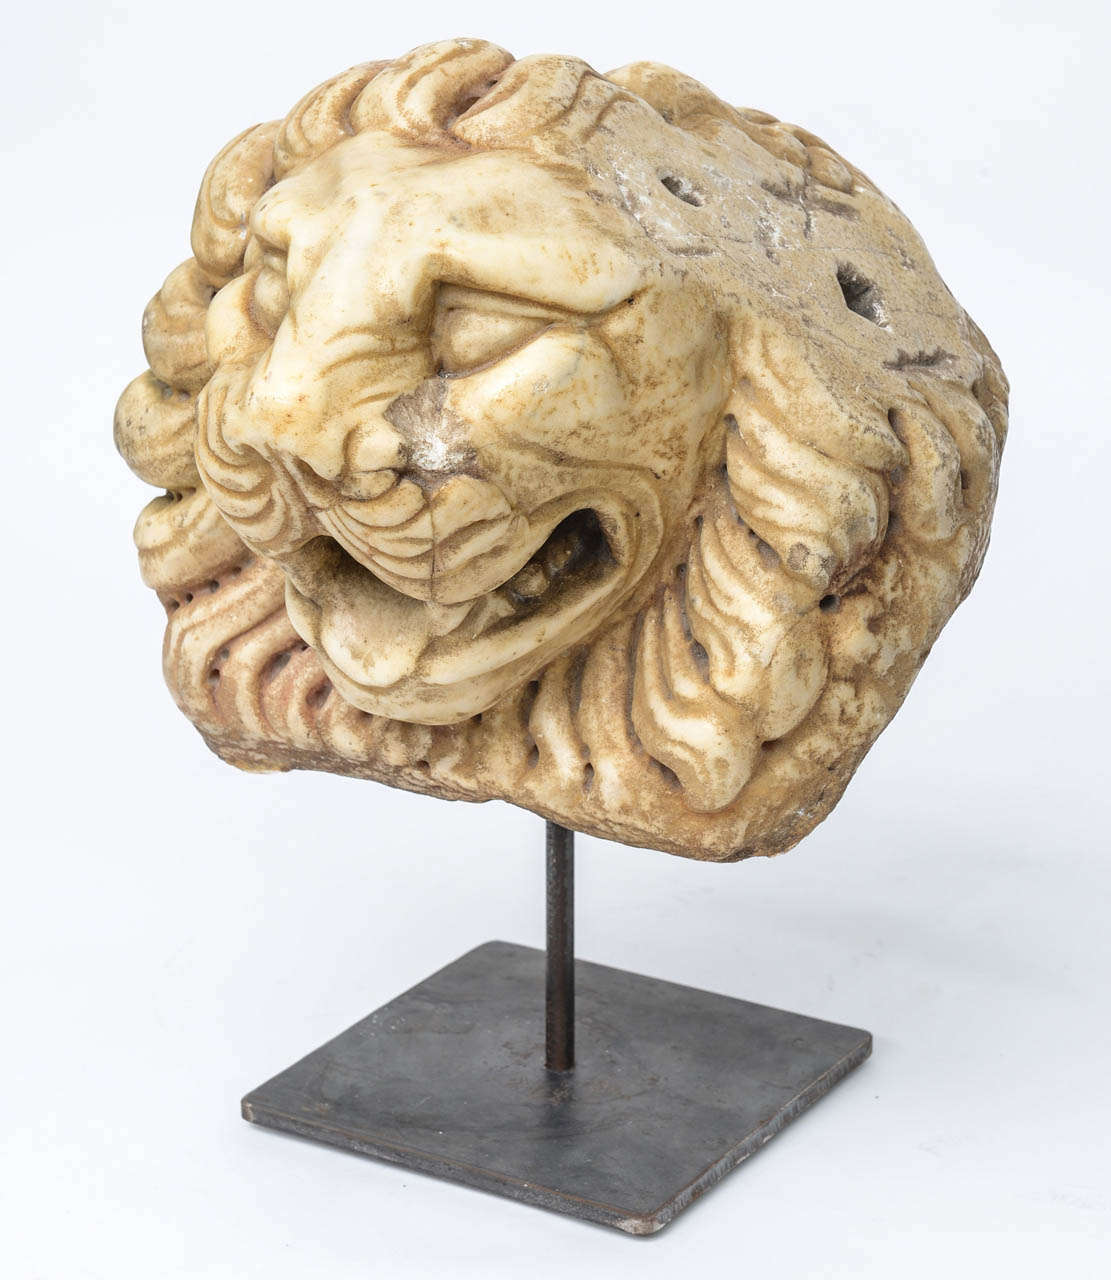 An impressive Baroque fountain spout in the form of a lion's head, probably carved in the Italian Veneto region.